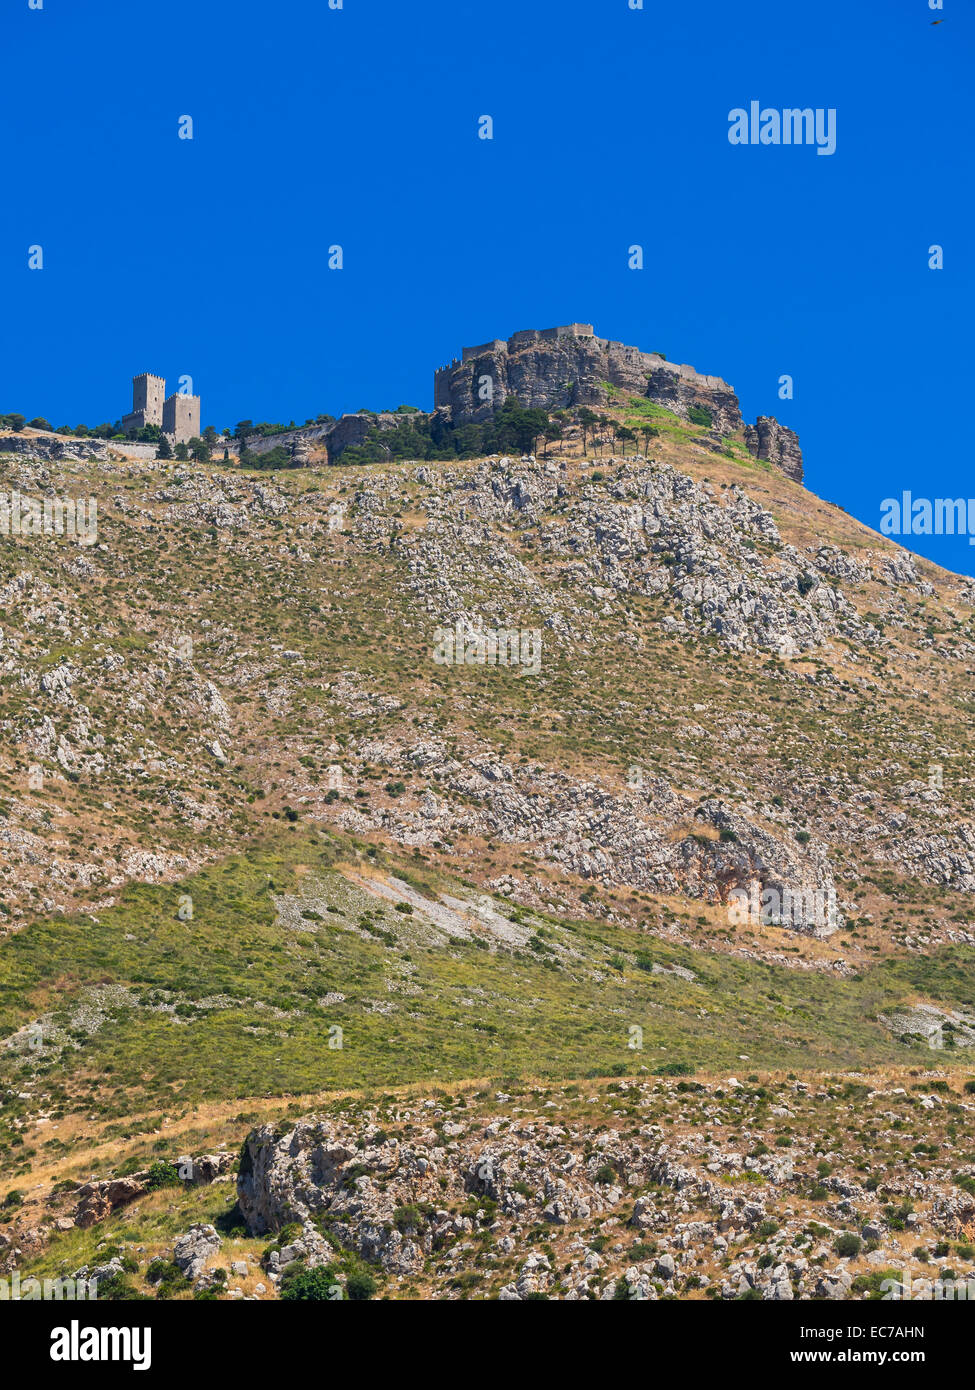 Italy, Sicily, Province of Trapani, Erice, View to Monte Erice Stock Photo